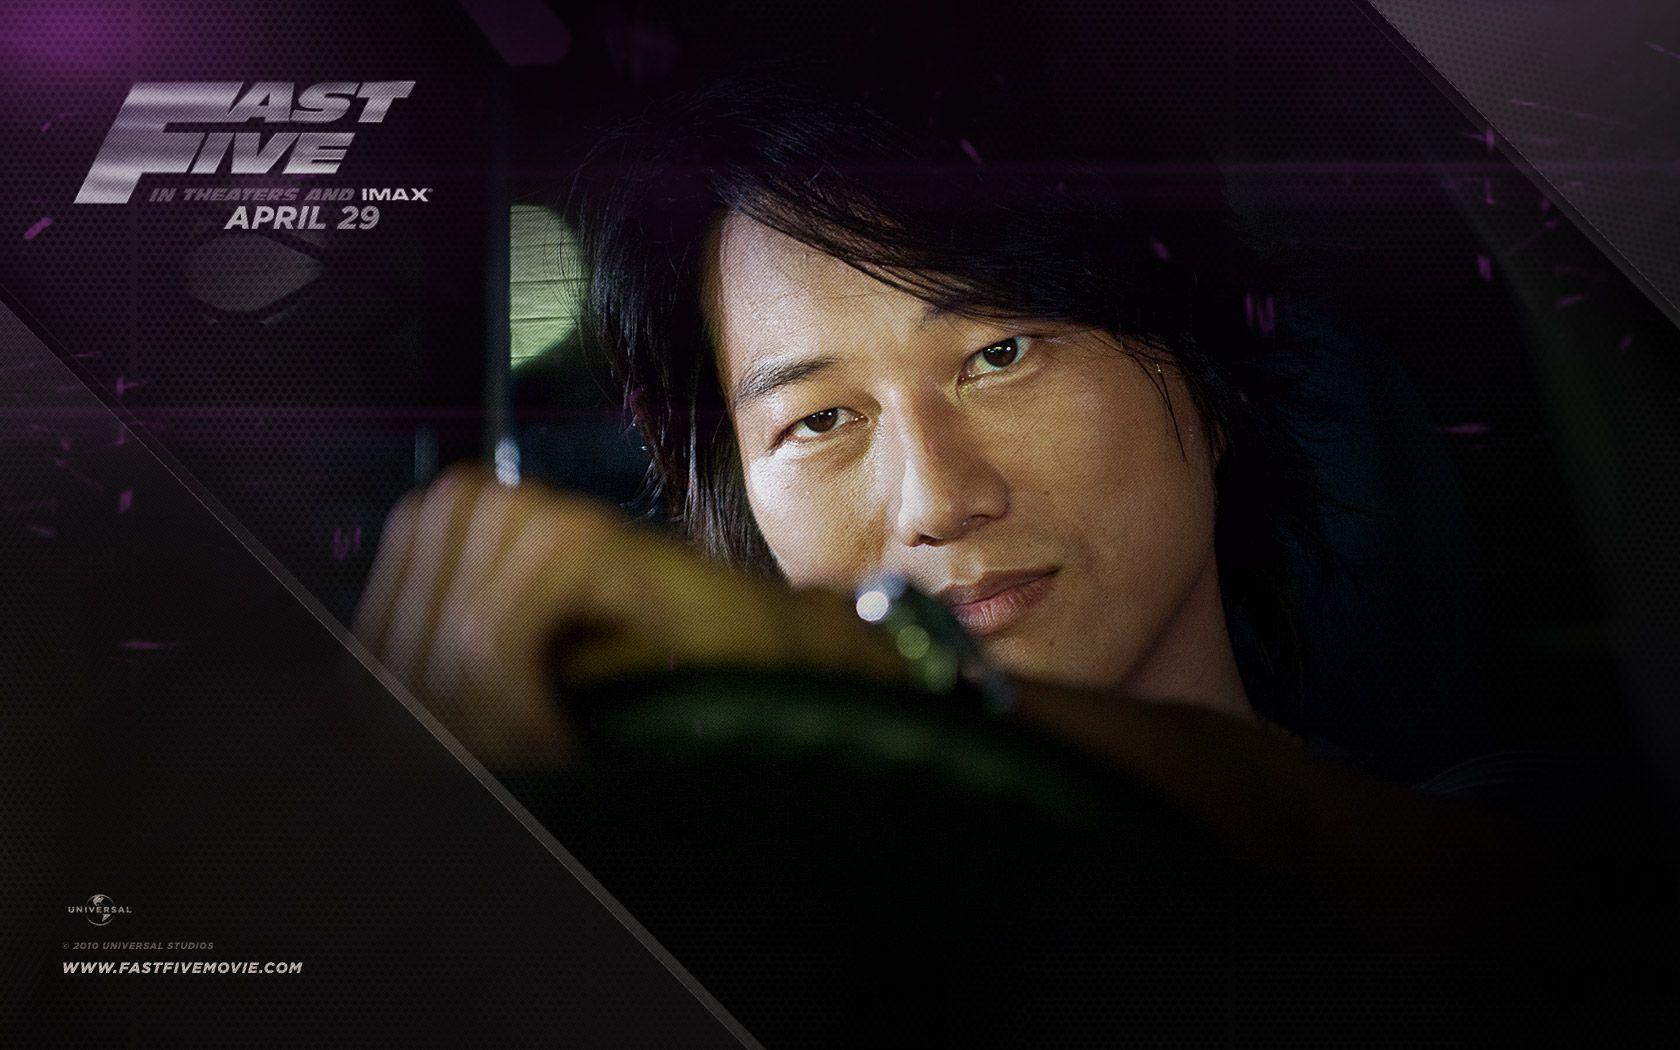 Sung Kang in Fast Five 10. wallpaper Five